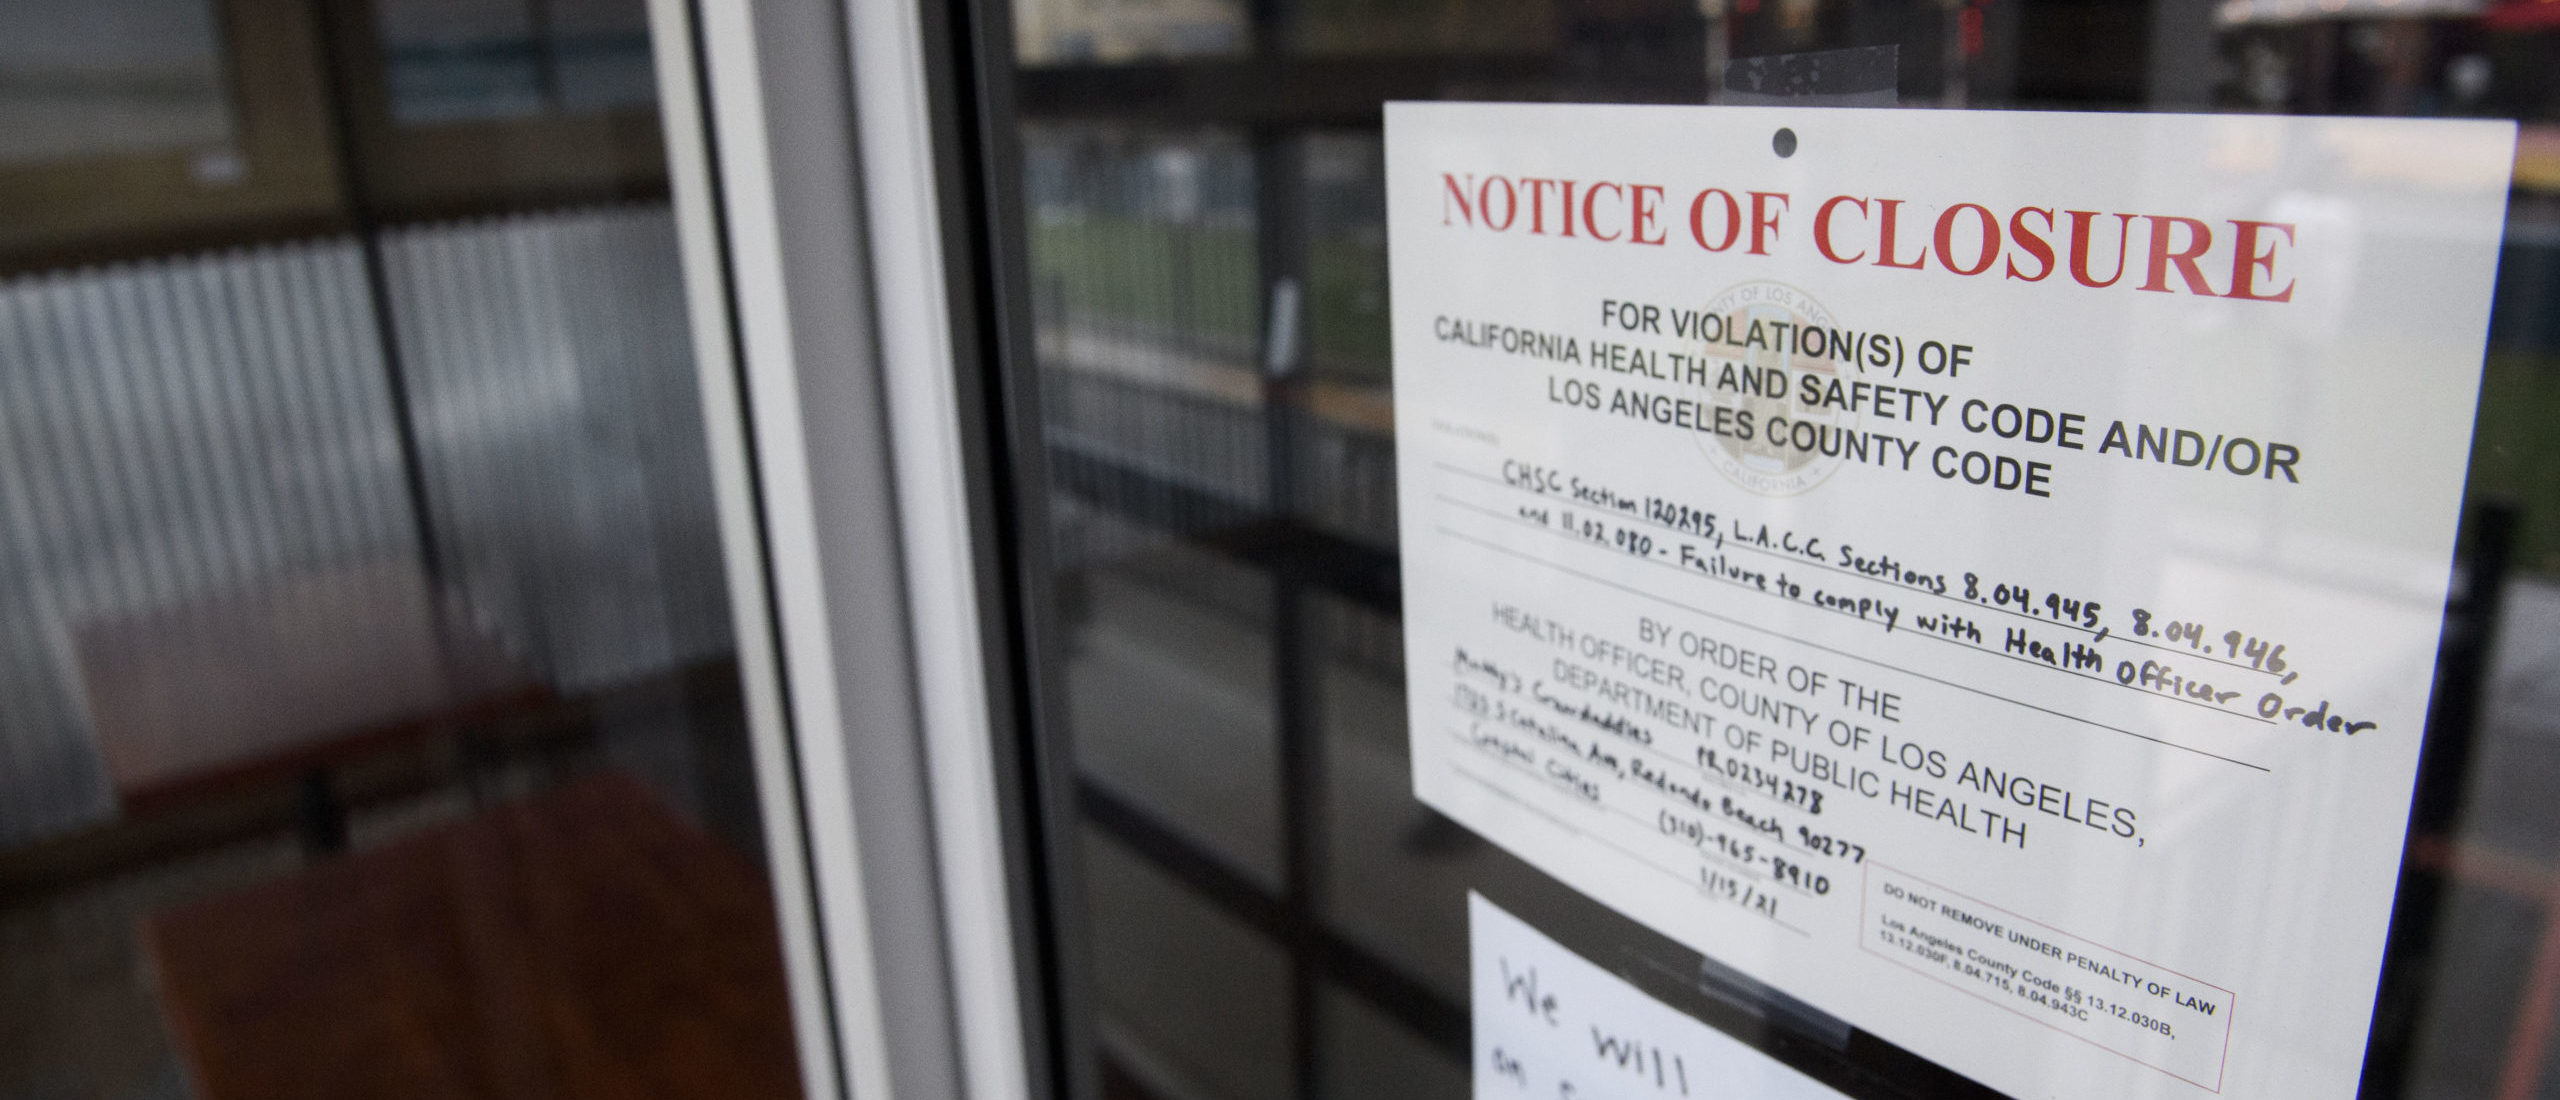 A County of Los Angeles Department of Public Health "Notice of Closure" sign hangs on the door of a restaurant temporality closed due to violations including "failure to comply with health officer order" amid increased Covid-19 restrictions on businesses on January 22, 2021 in Redondo Beach, California. (Photo by PATRICK T. FALLON/AFP via Getty Images)